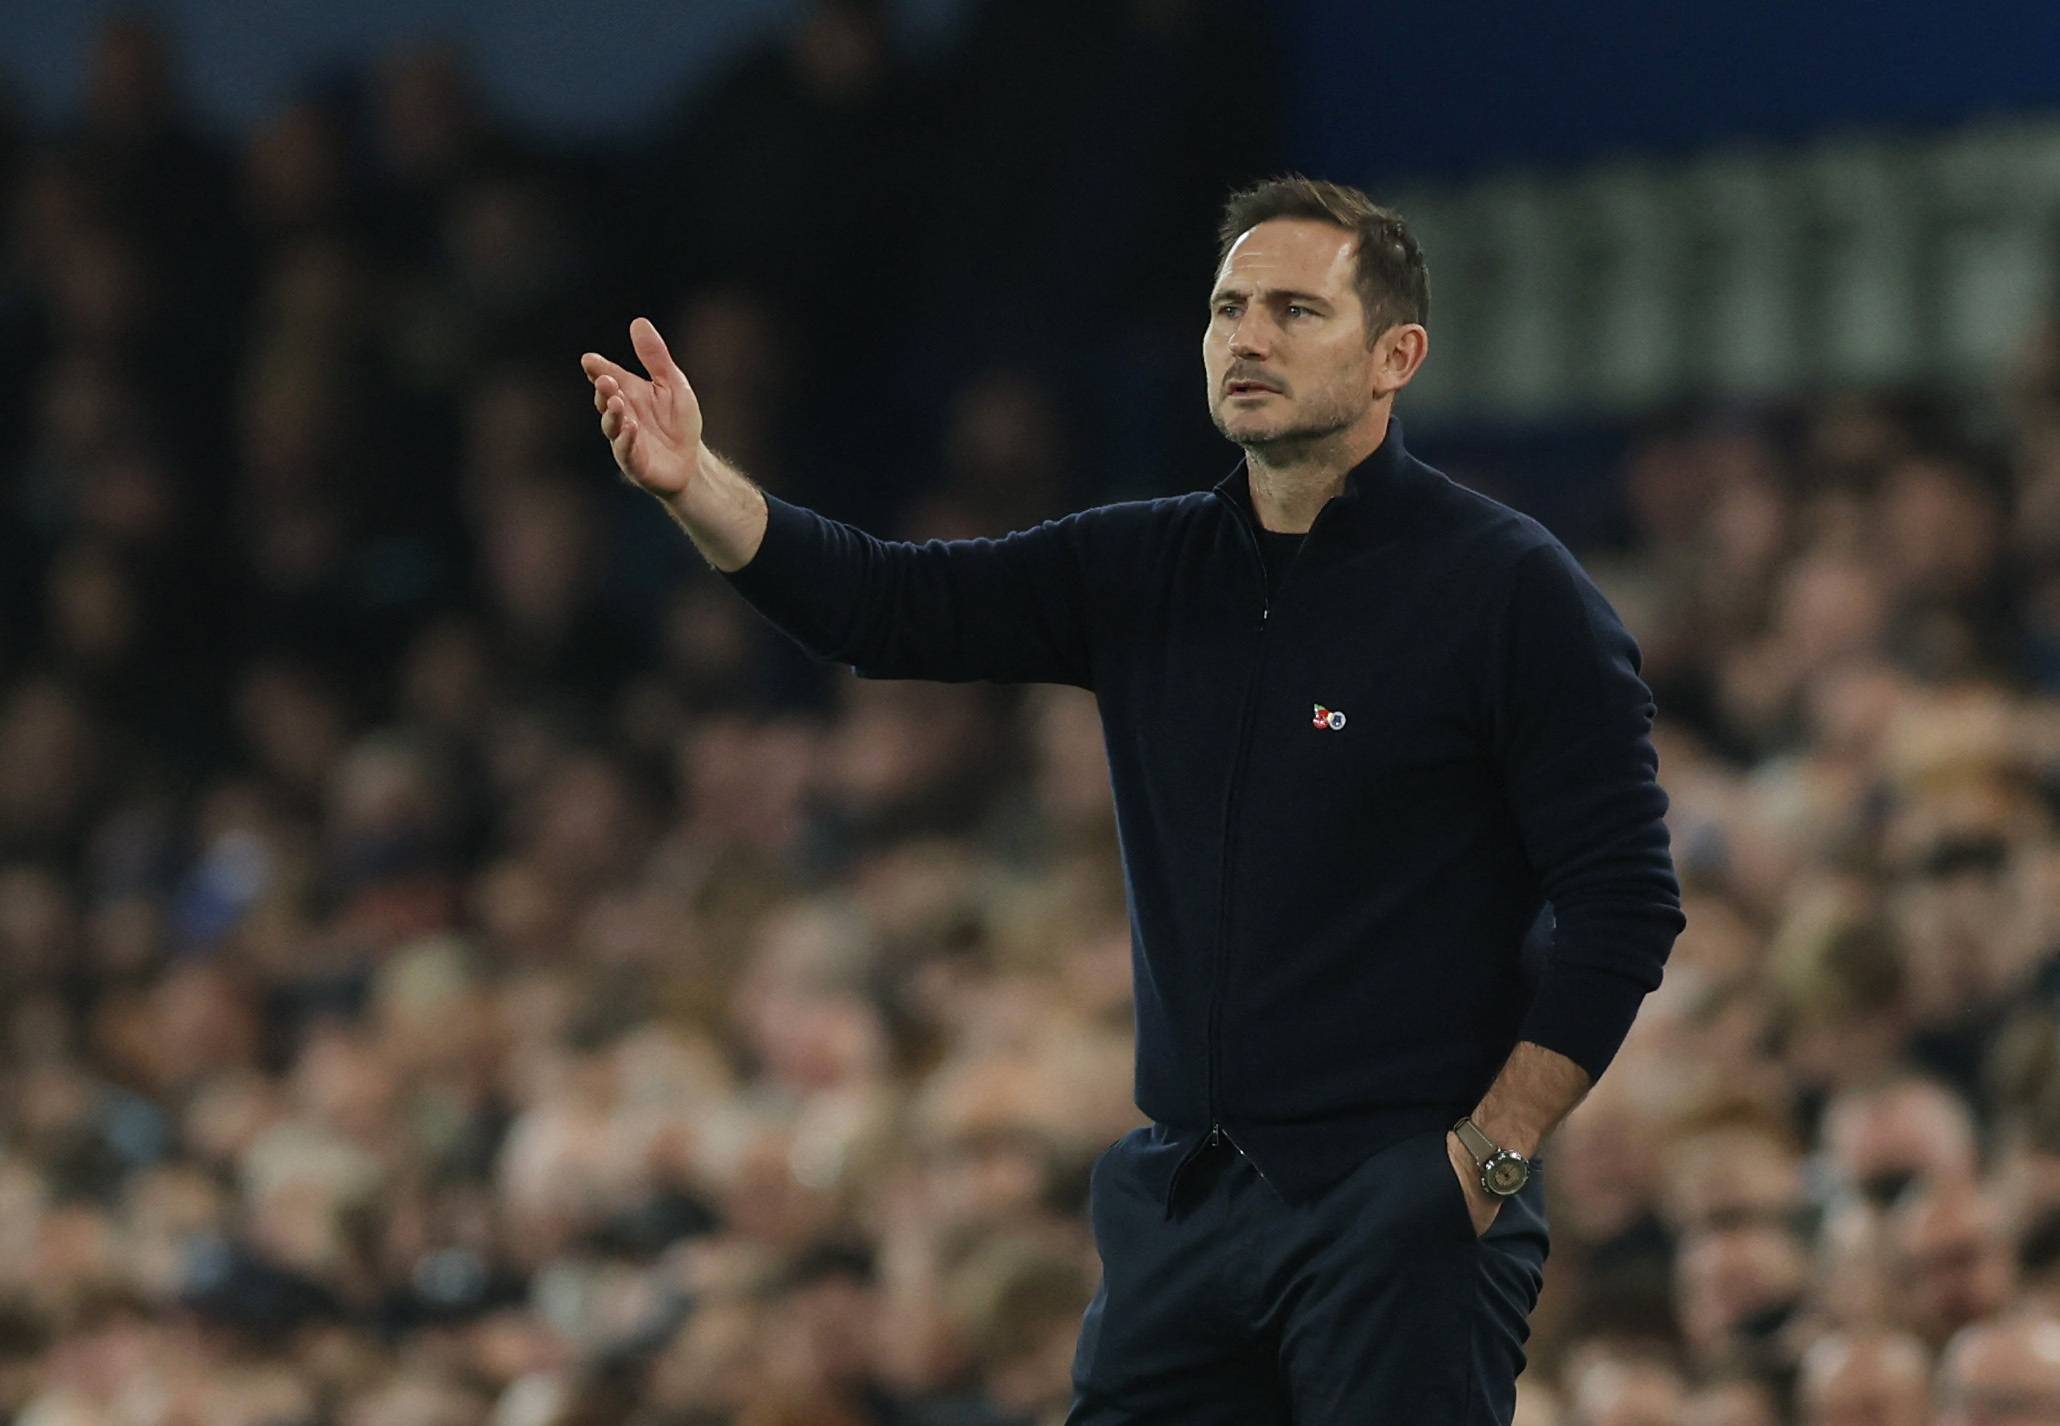 Frank Lampard on the touchline during Everton vs Leicester City